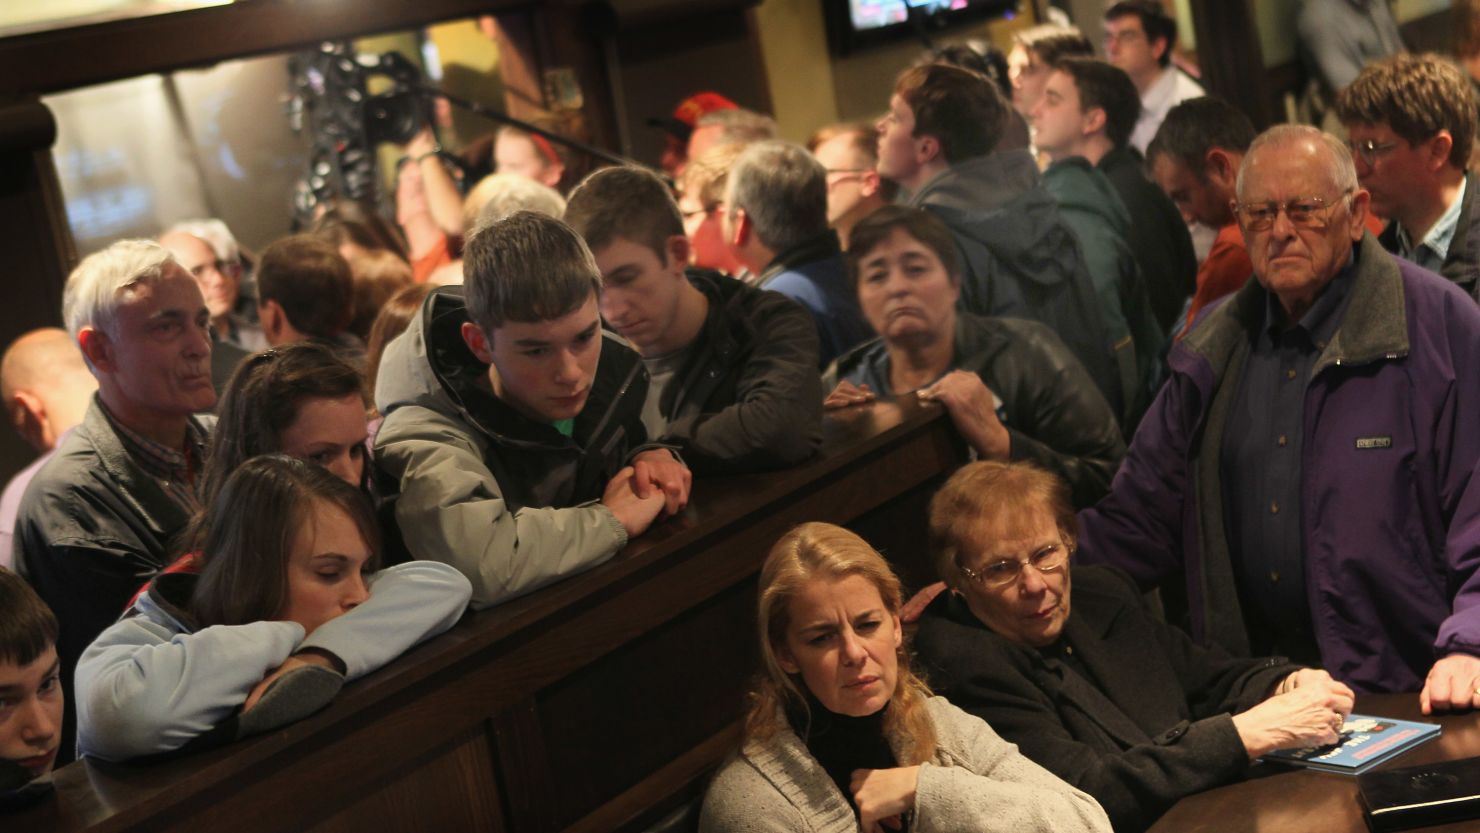 Guests in Marshalltown, Iowa watch a live C-SPAN broadcast as Rick Santorum speaks in an adjacent room at Legends Bar and Grill last week